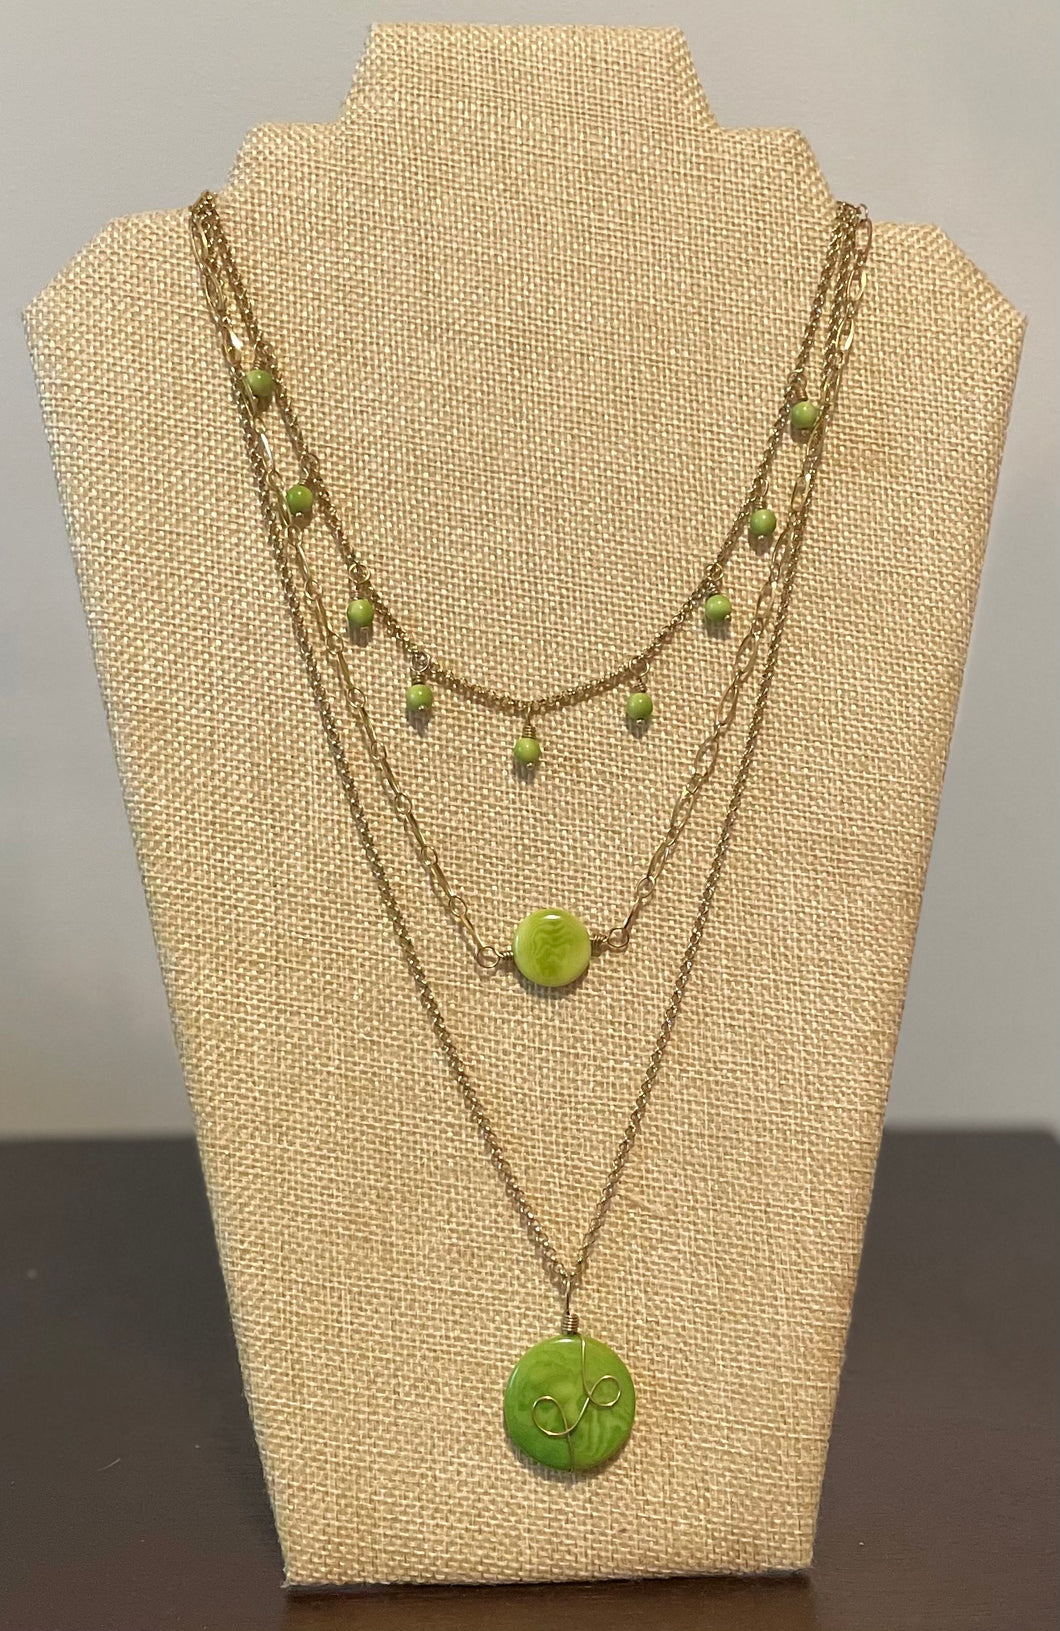 Green Triple Layer Tagua Necklace